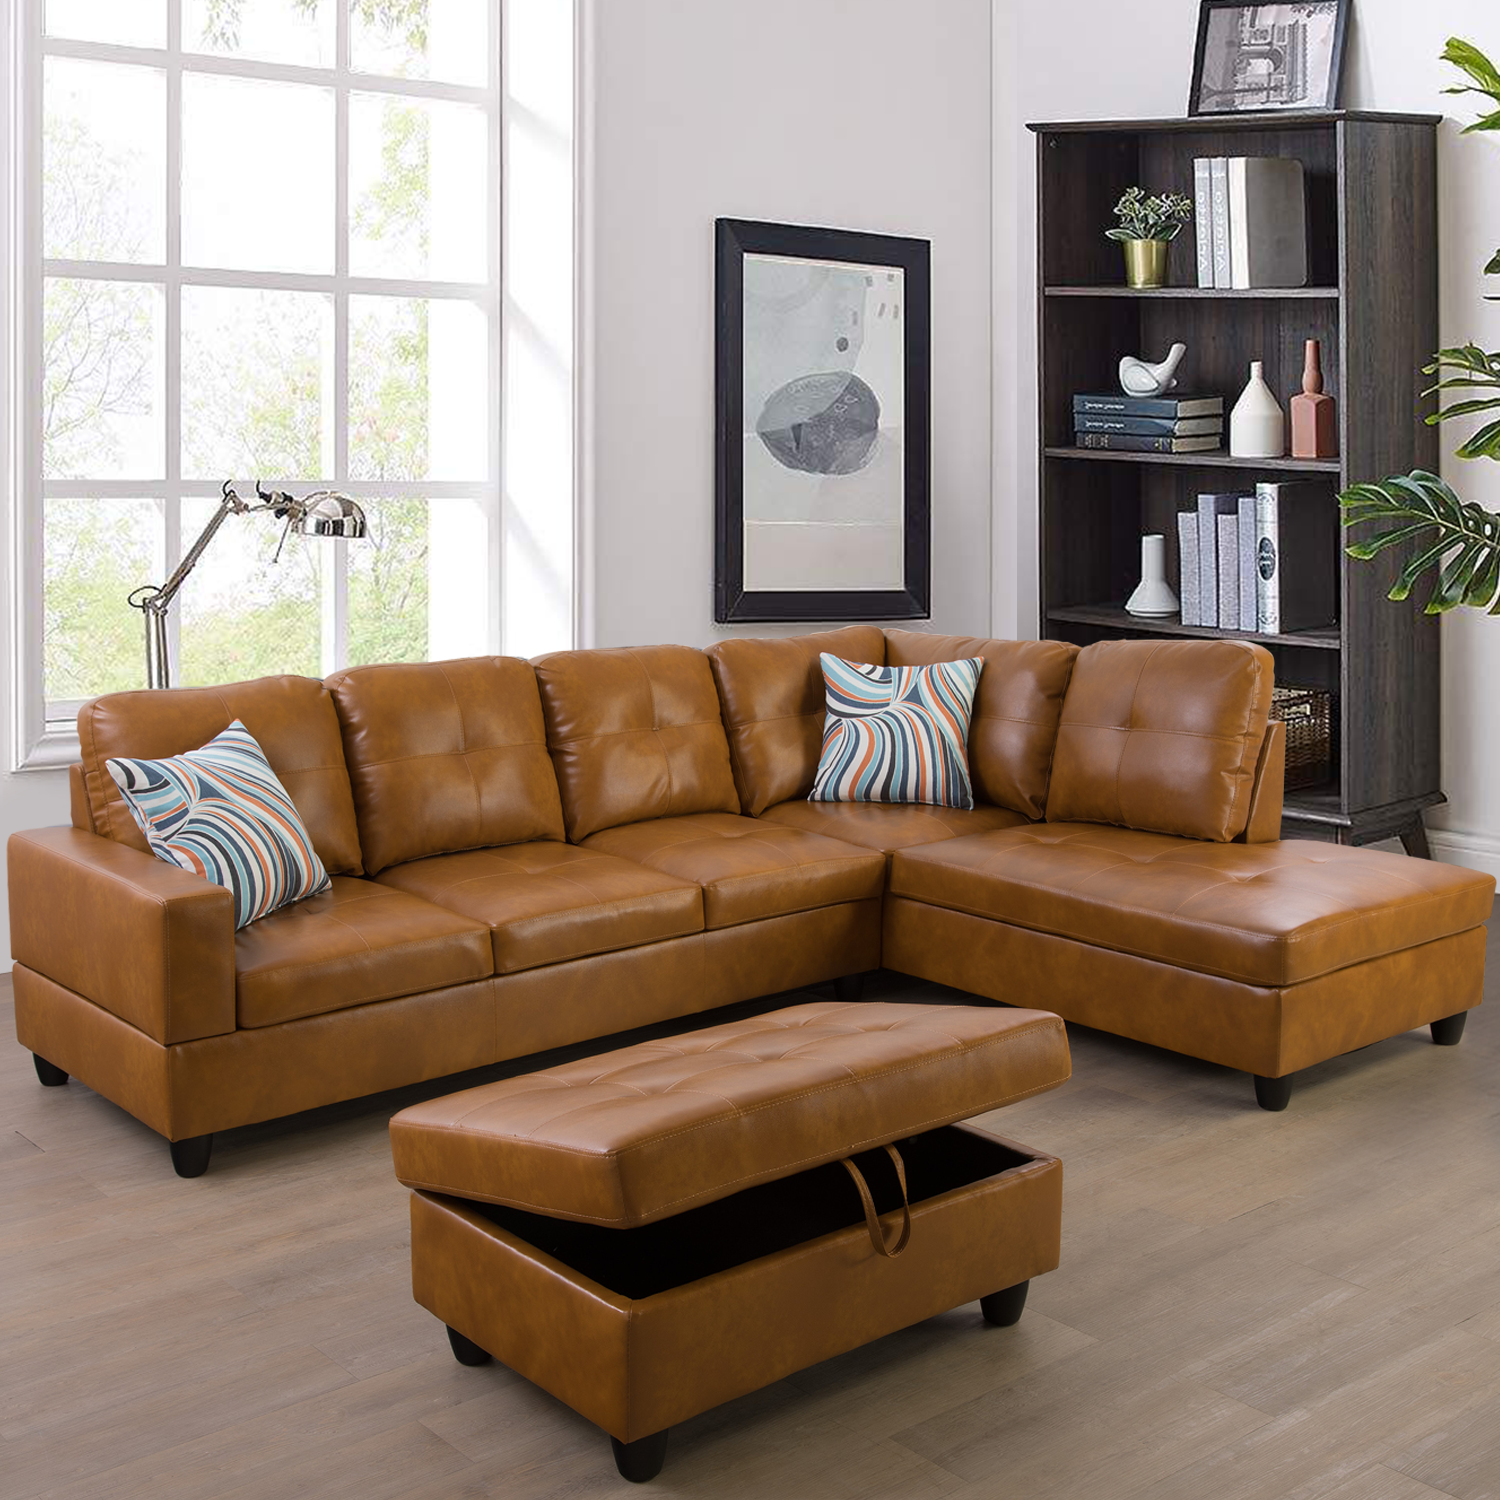 Ainehome Ginger L-Shaped Leather Combo Sofa Set